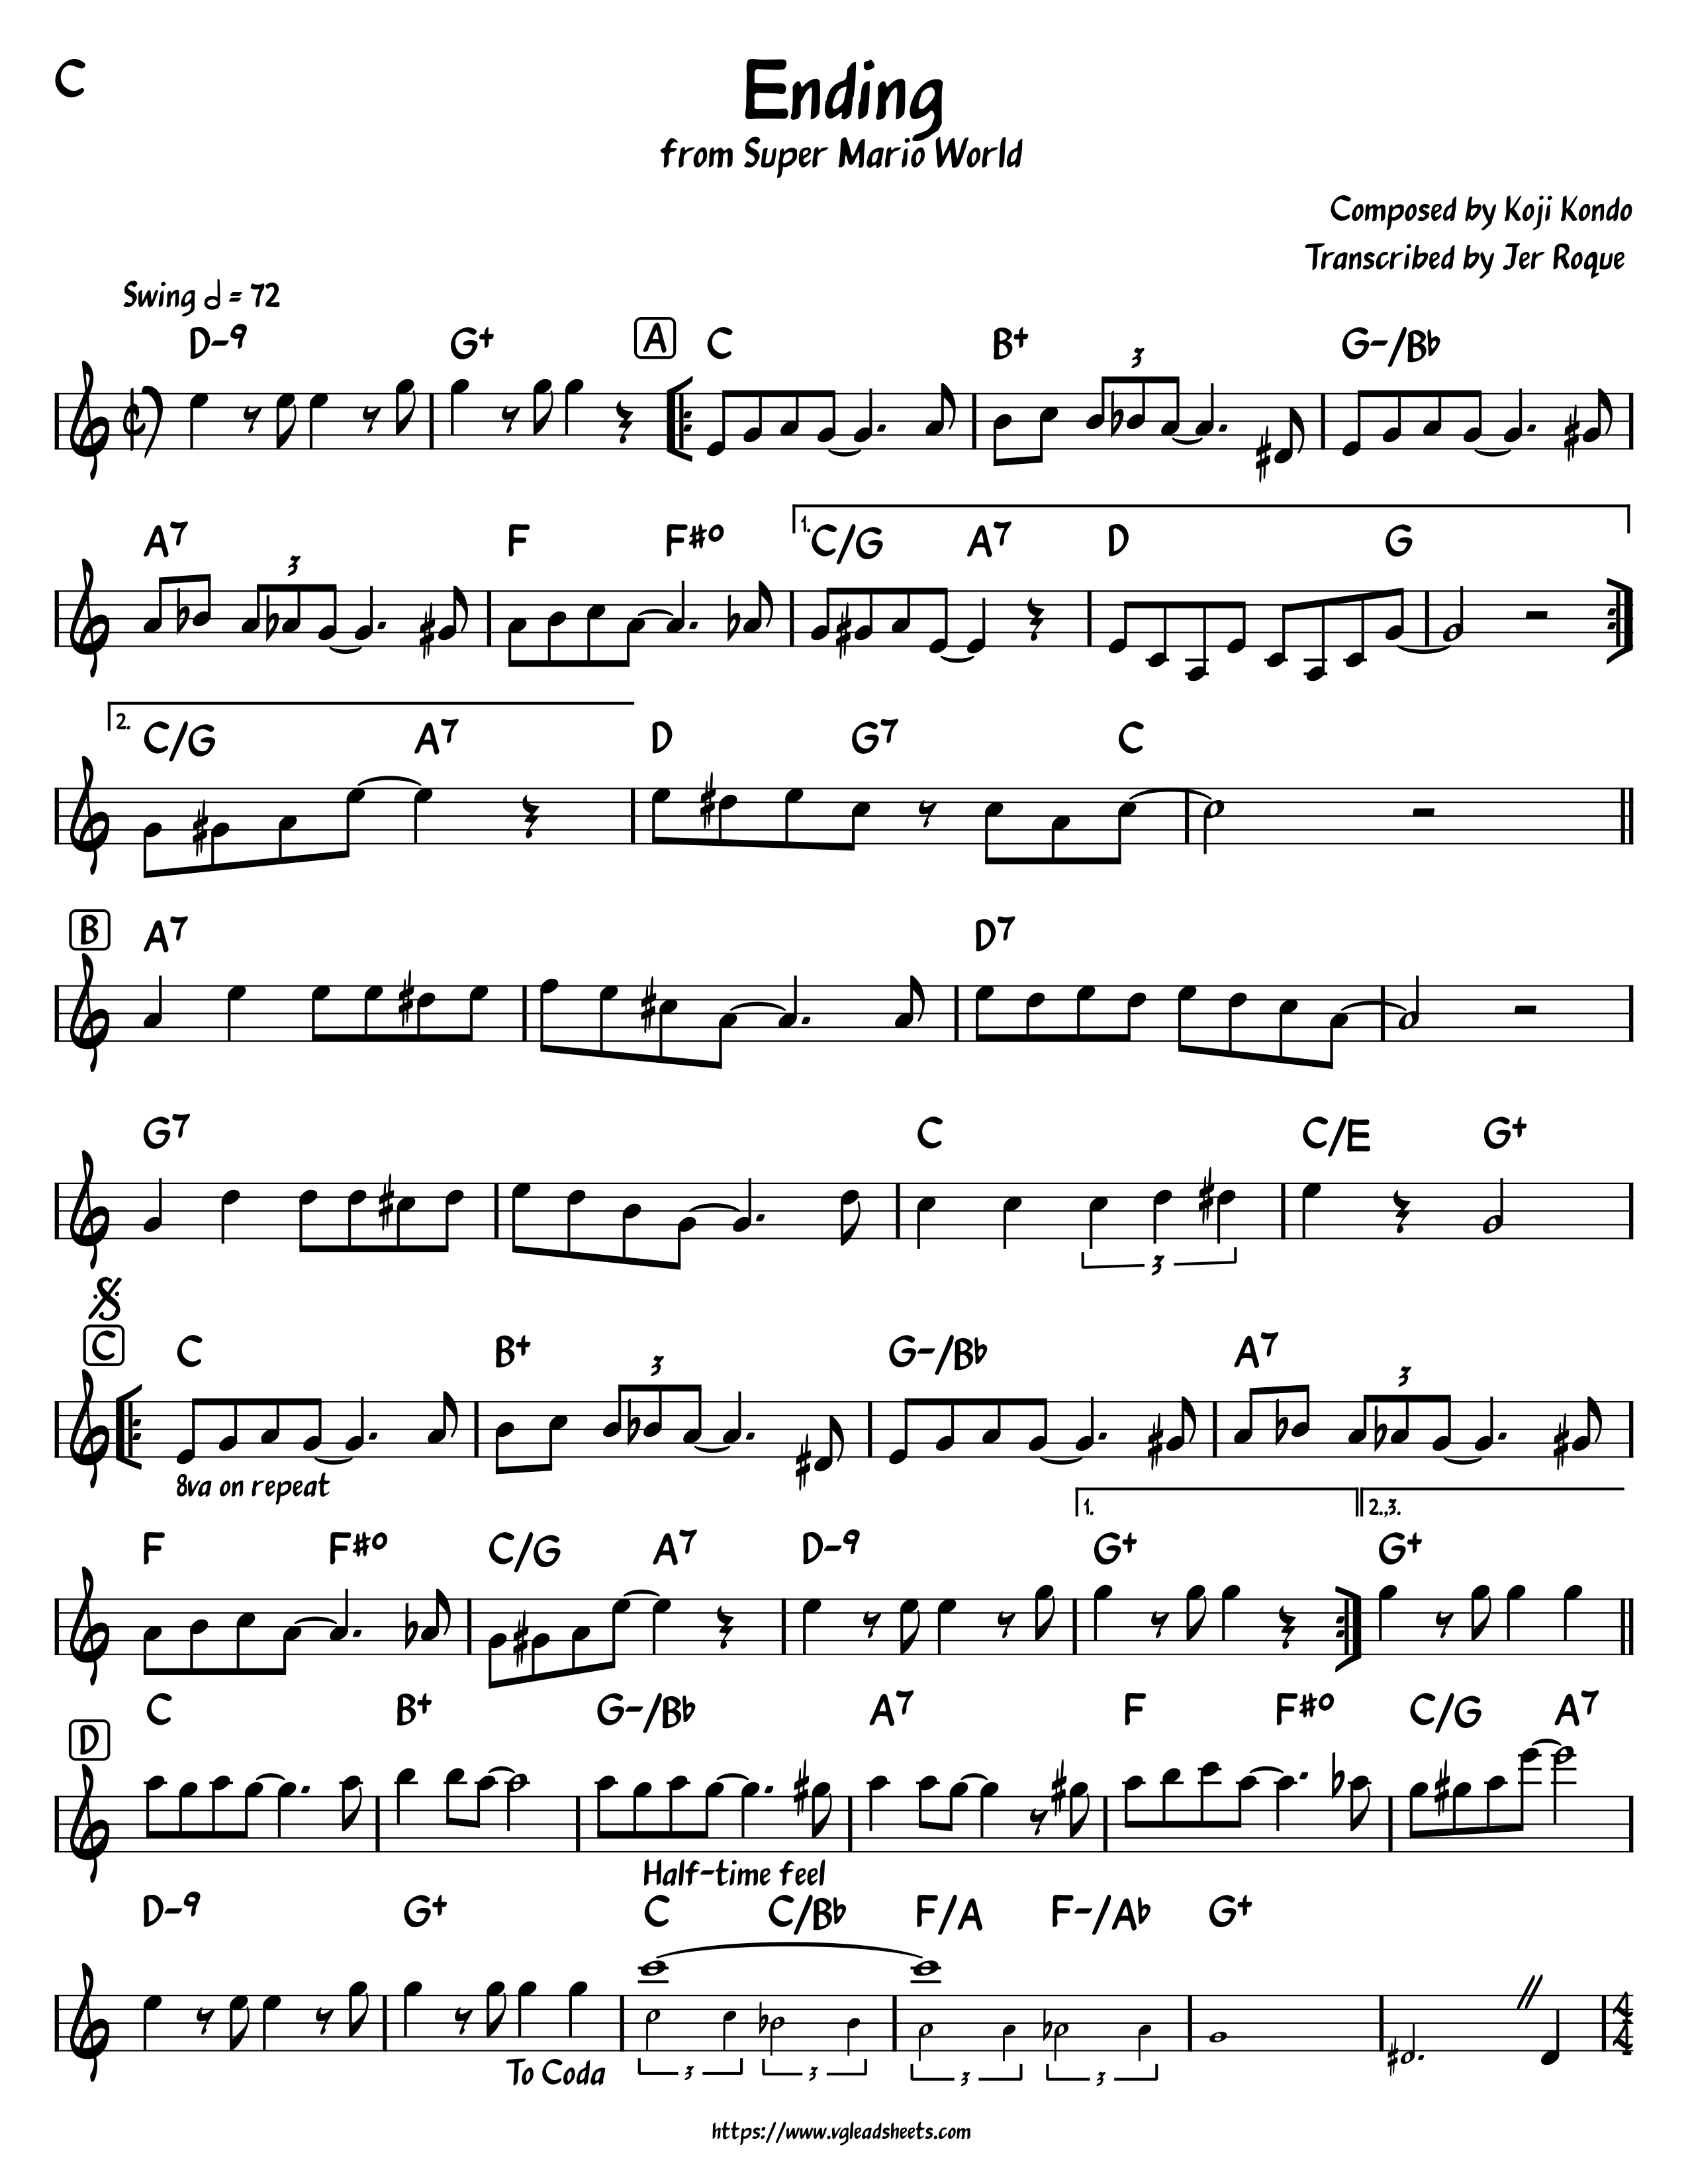 Super Mario World Ending Vgleadsheets Com Lead Sheets For Video Game Music